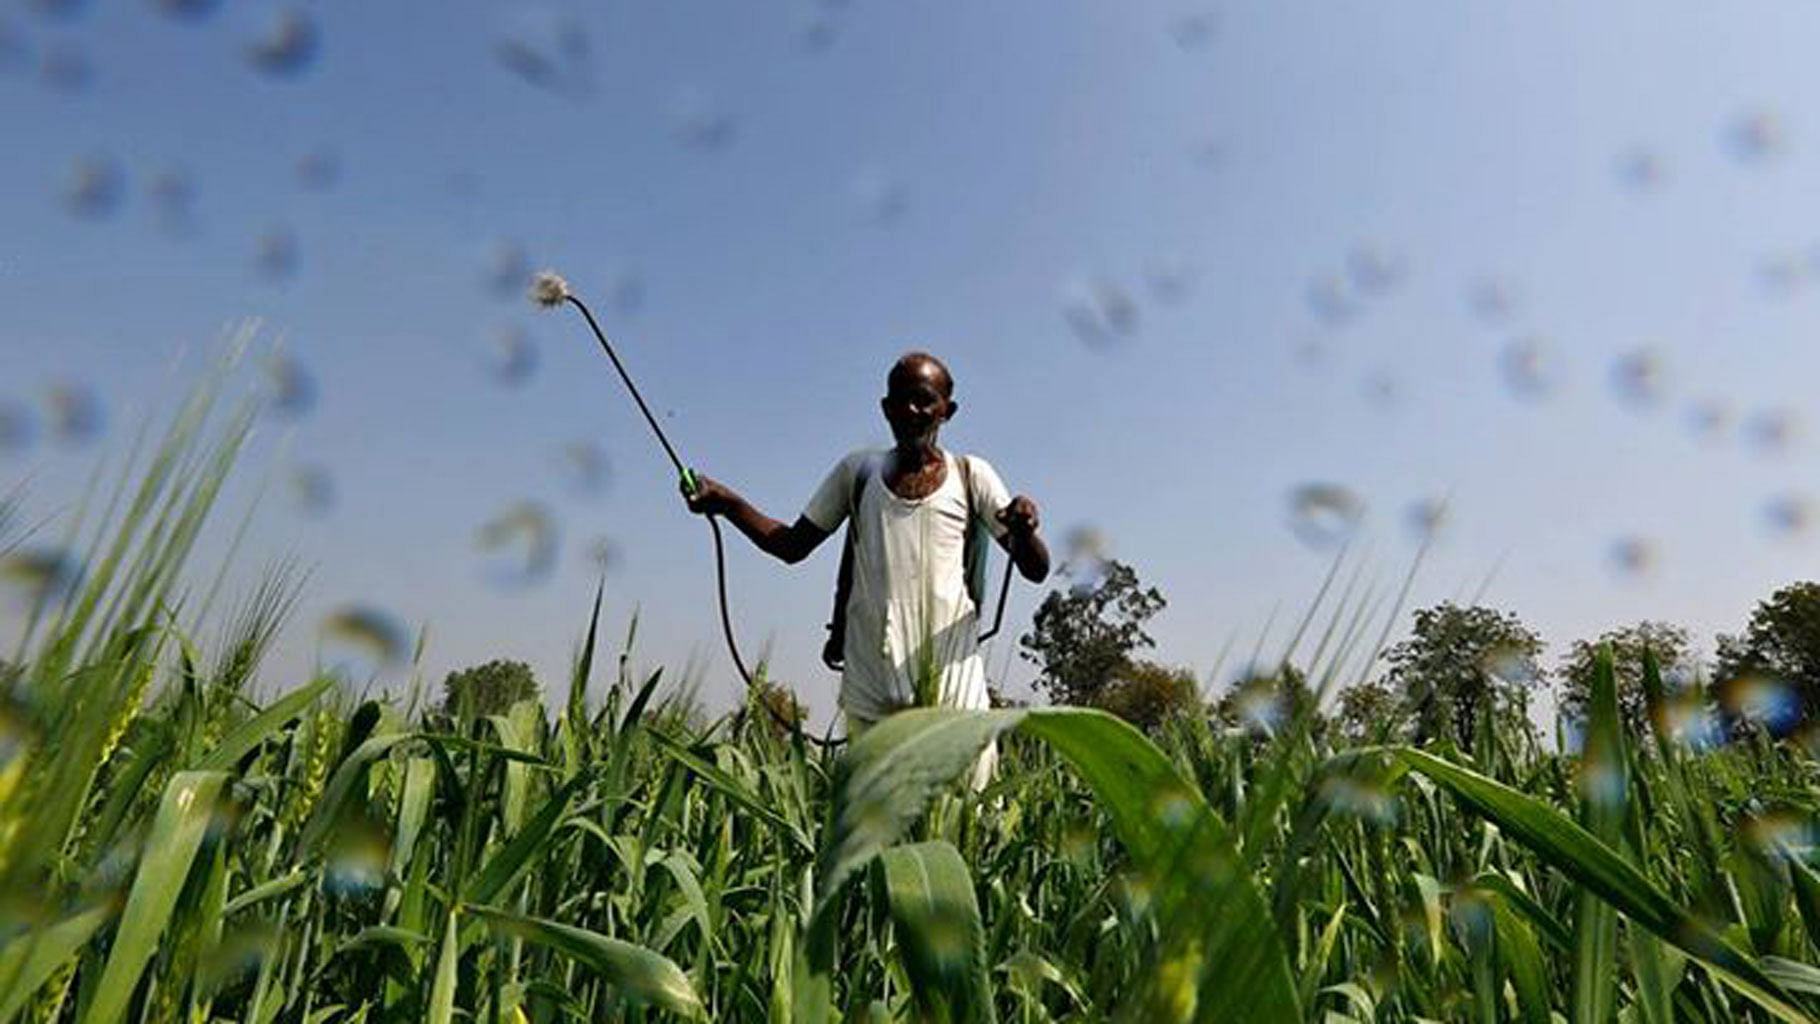 A farmer sprays a mixture of fertilizer and pesticide onto his wheat crop. Image used for representation.